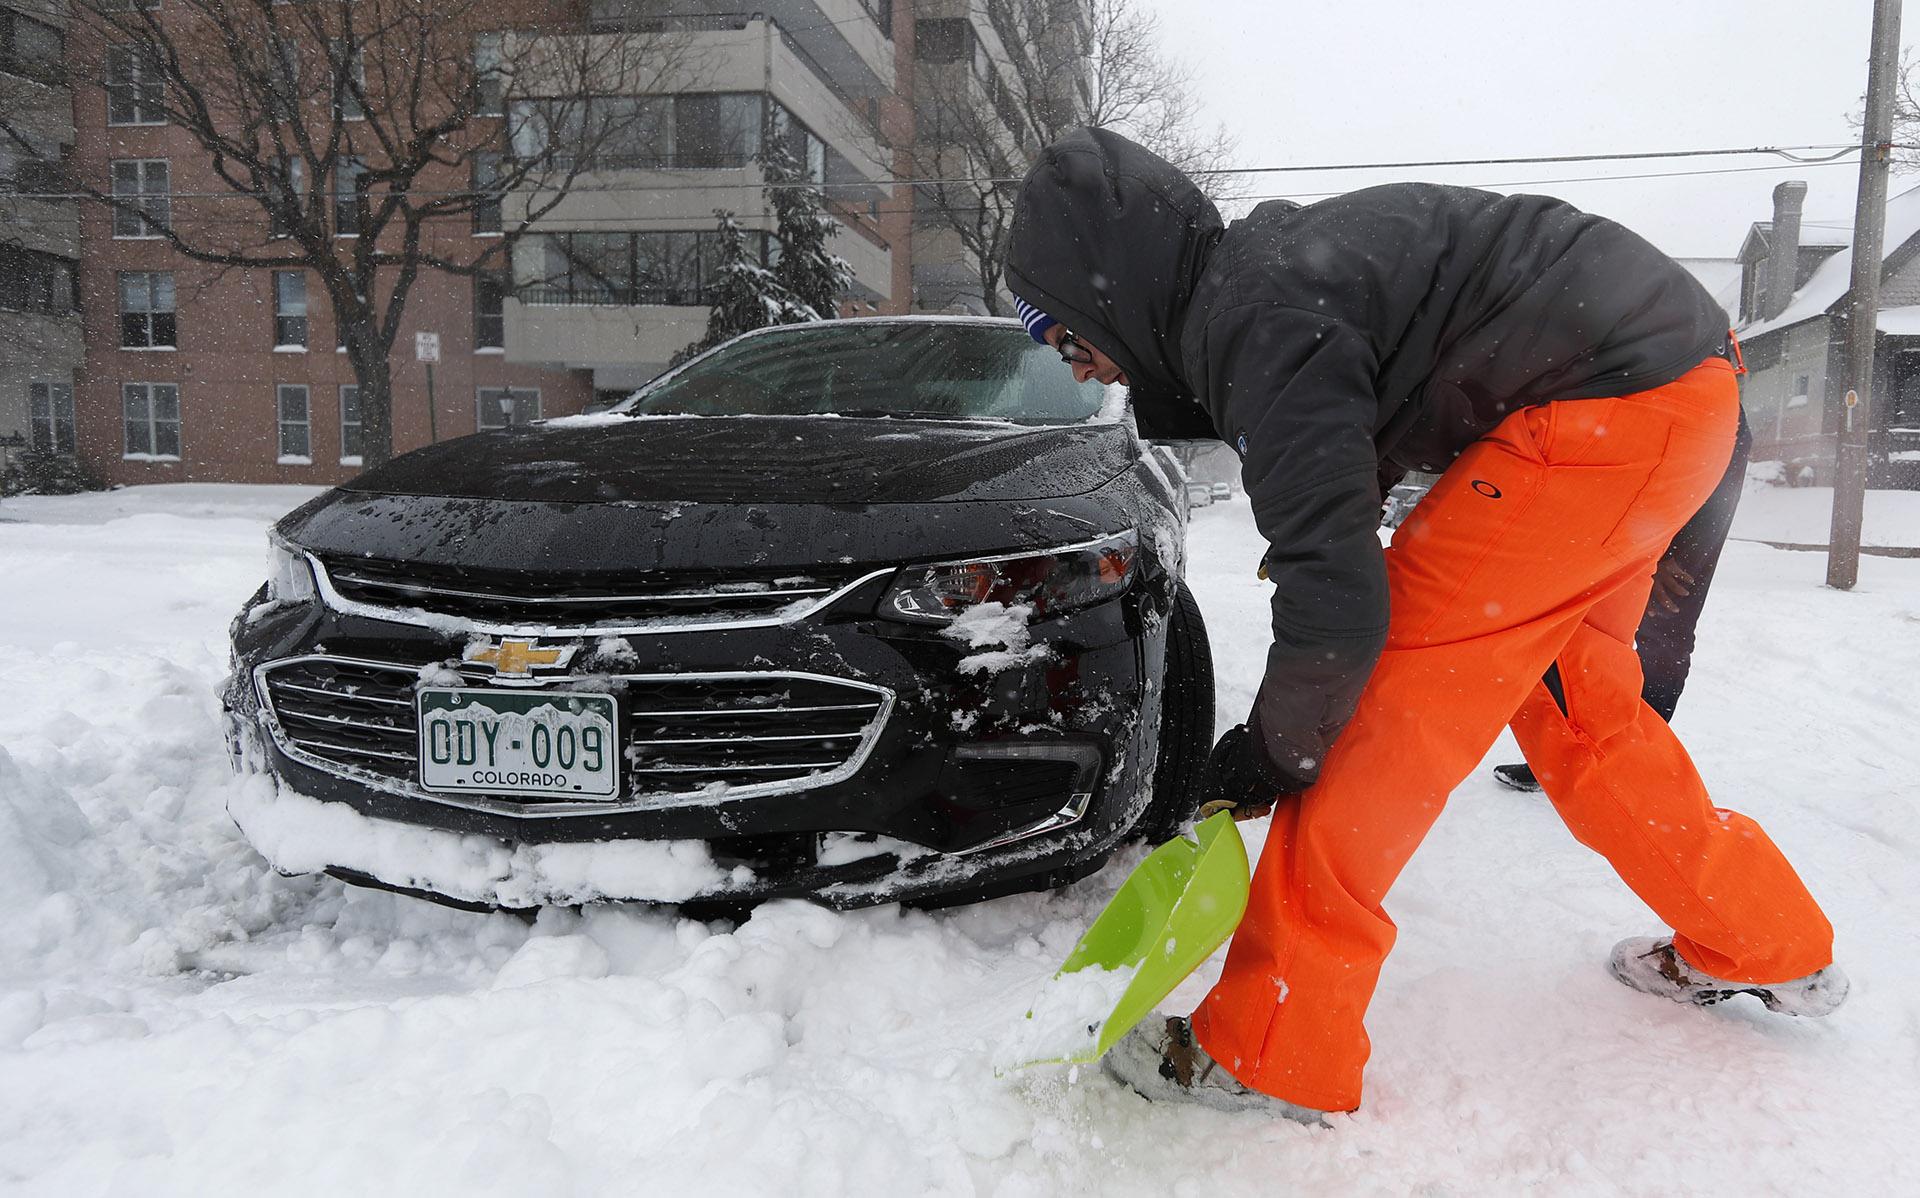 Erik Randa helps dig out a stuck Chevrolet Malibu being used by a ride-sharing service driver out of an intersection at 2nd Ave. and Pearl St. as a storm packing snow and high winds sweeps in over the region Tuesday, Nov. 26, 2019, in Denver. (AP Photo / David Zalubowski)